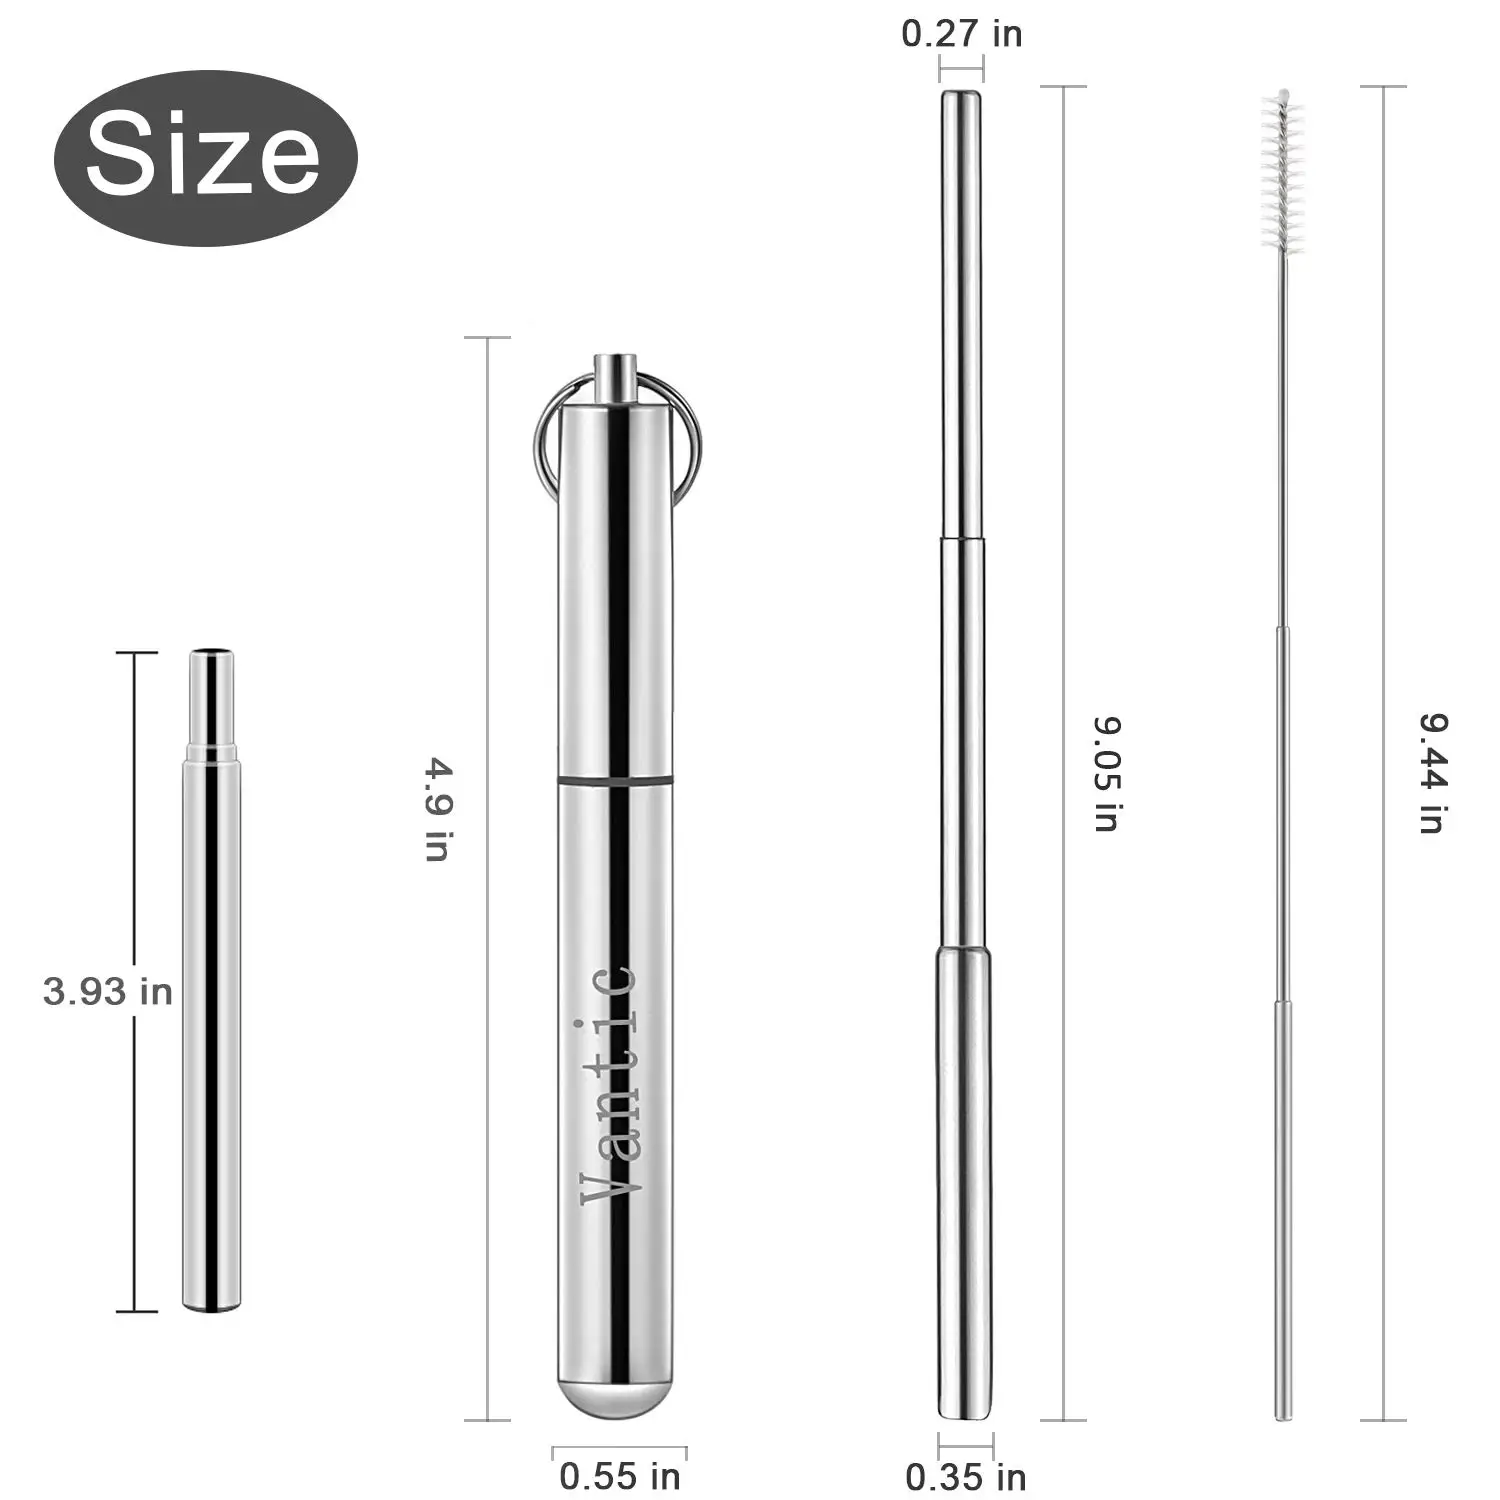 2Pcs Reusable Metal Drinking Straws Telescopic Portable Stainless Steel Straw with Case& Cleaning Brush